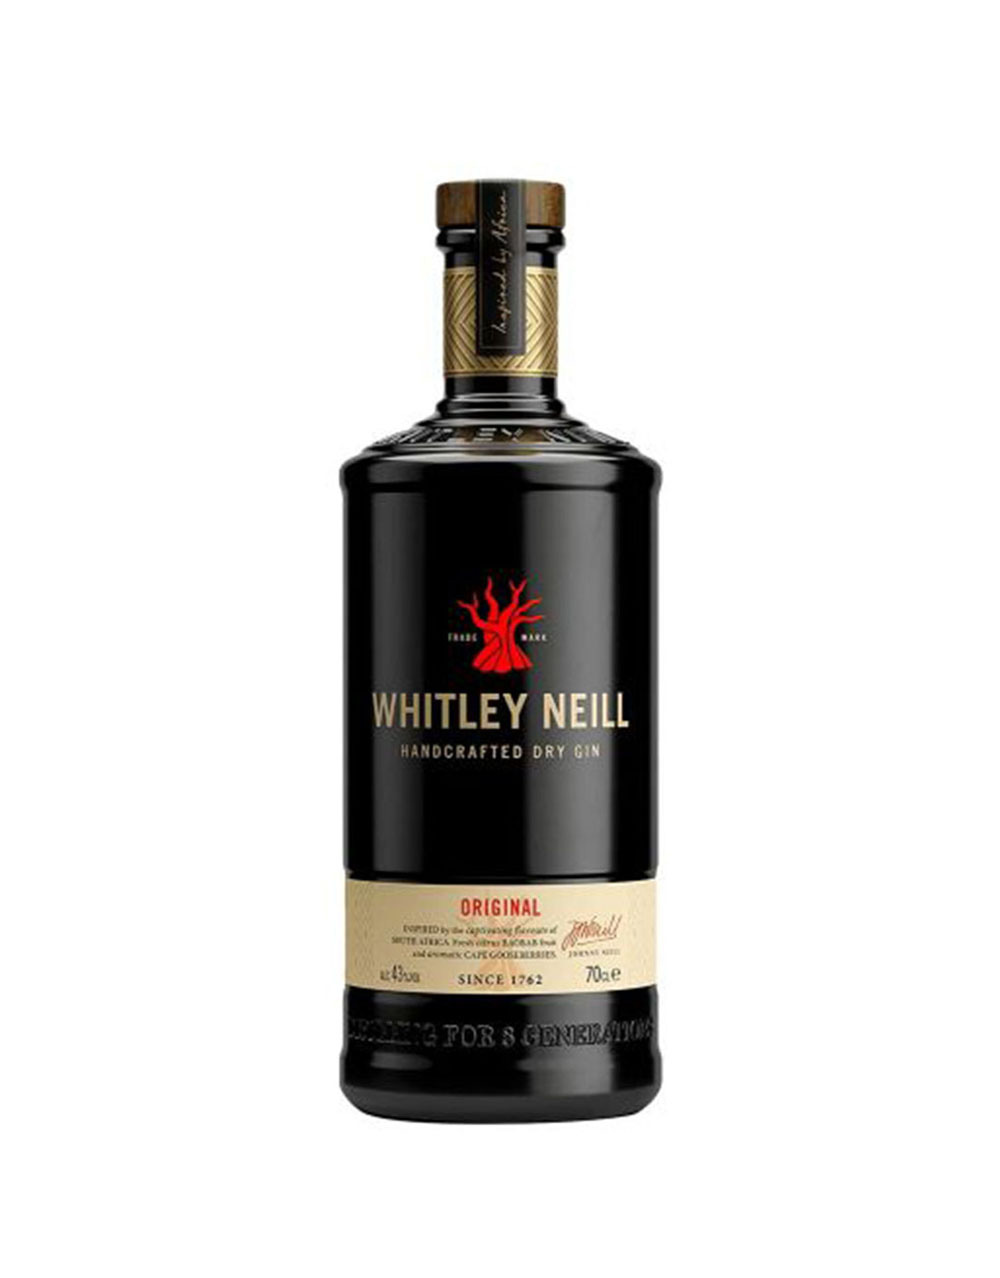 Whitley Neill Original Handcrafted Dry Gin